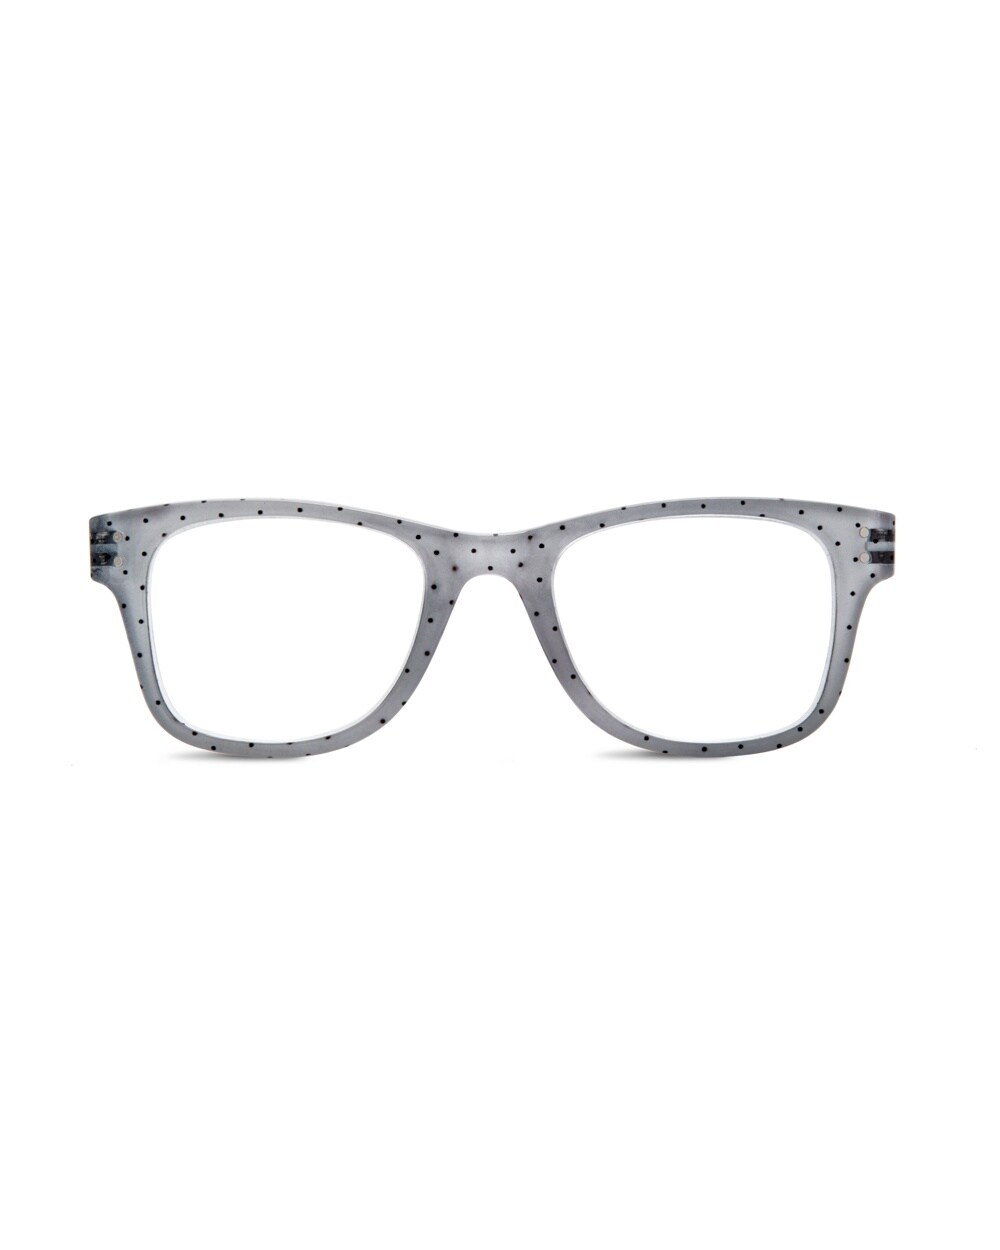 Pindot Party Reading Glasses